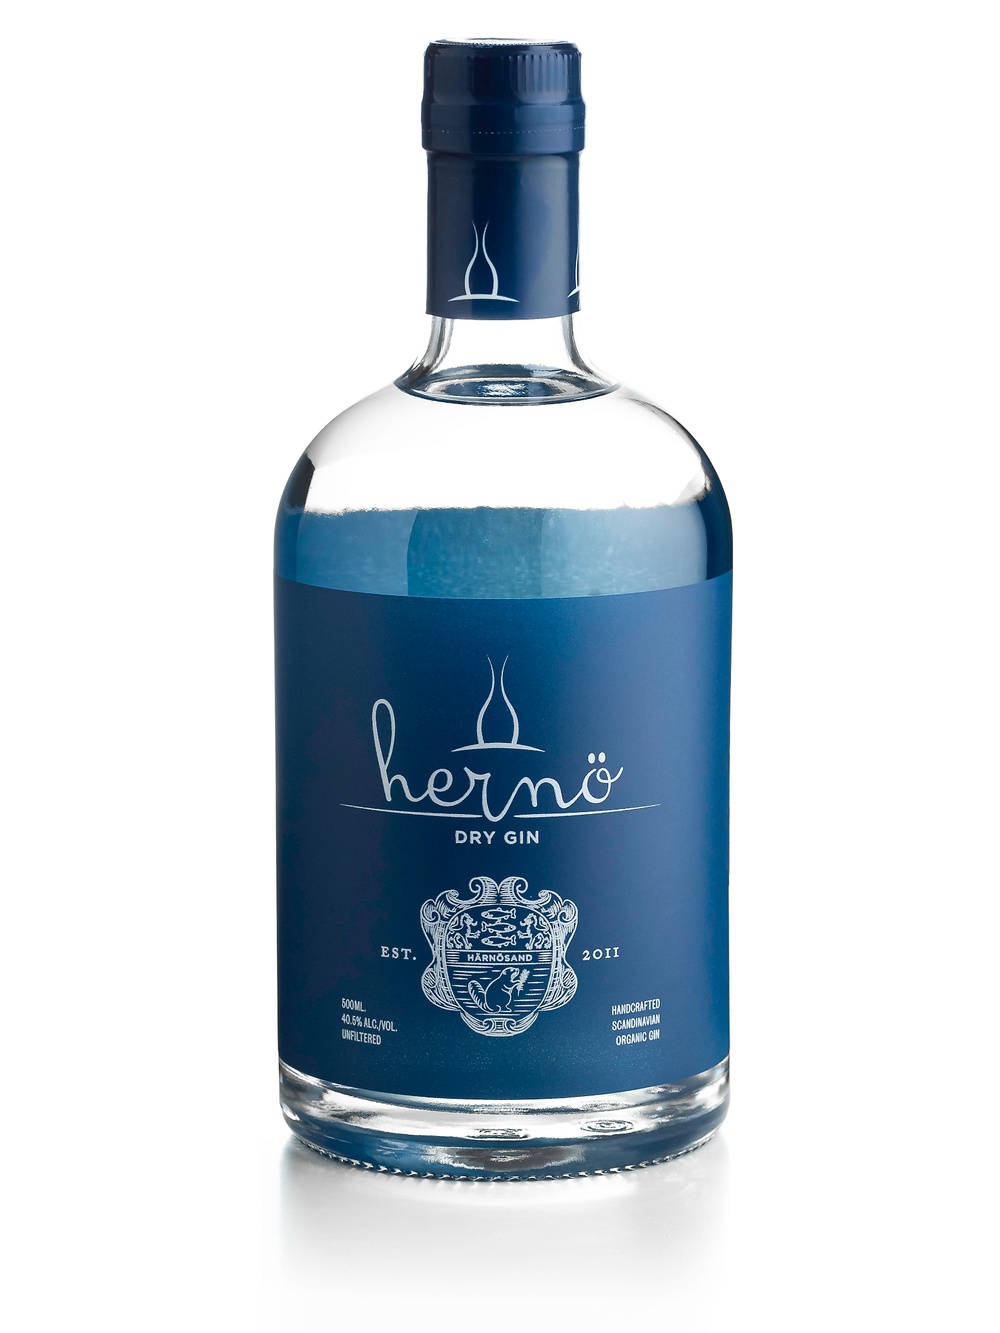 Crafted from natural and carefully selected organic botanicals, Hernö Dry Gin is a round and smooth London dry gin diluted to 40,5% ABV. Hernö Dry Gin is awarded with IWSC World’s best London Dry Gin and World’s best Gin & Tonic but is also very enjoyable on its own.